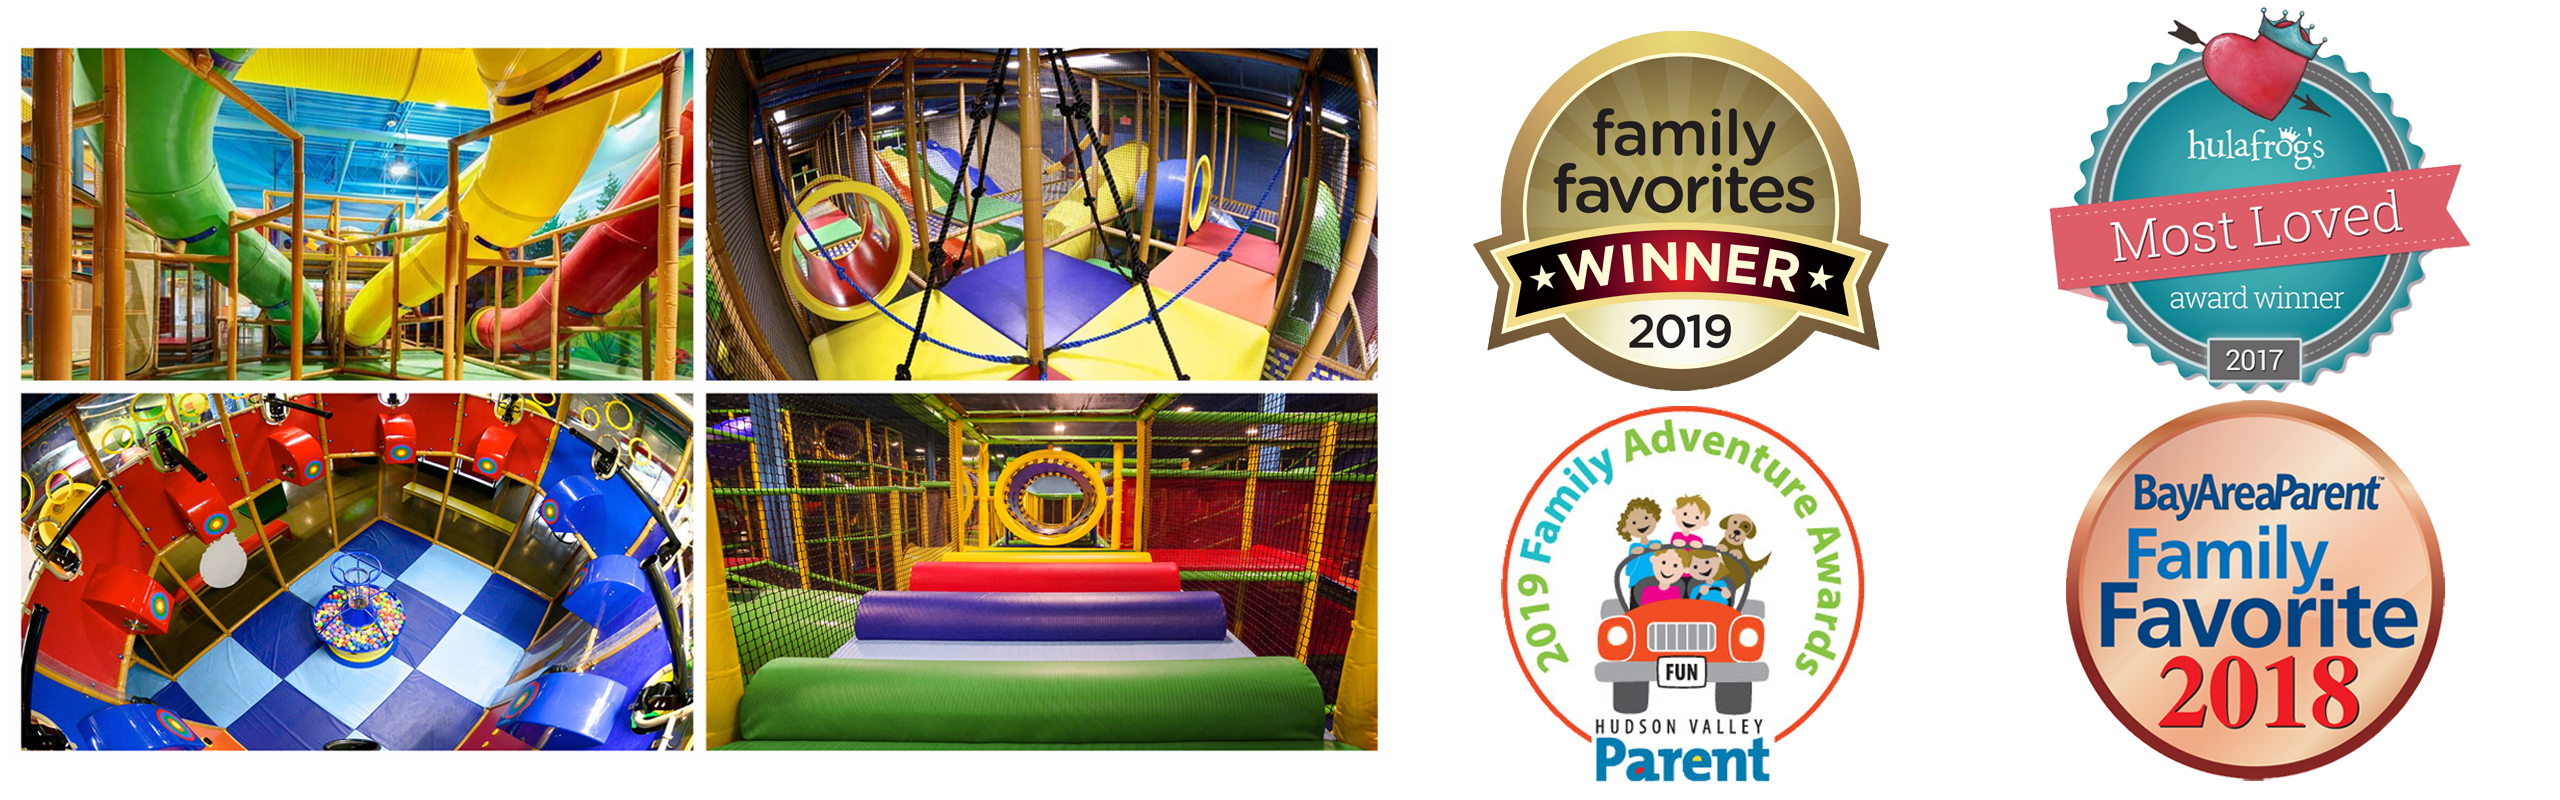 four images of activity areas and four images of awards given to Billy Beez - family favorites winner 2019, hulafrog's most loved award winner 2017, 2019 family adventure awards, and BayAreaParent Family Favorite 2018